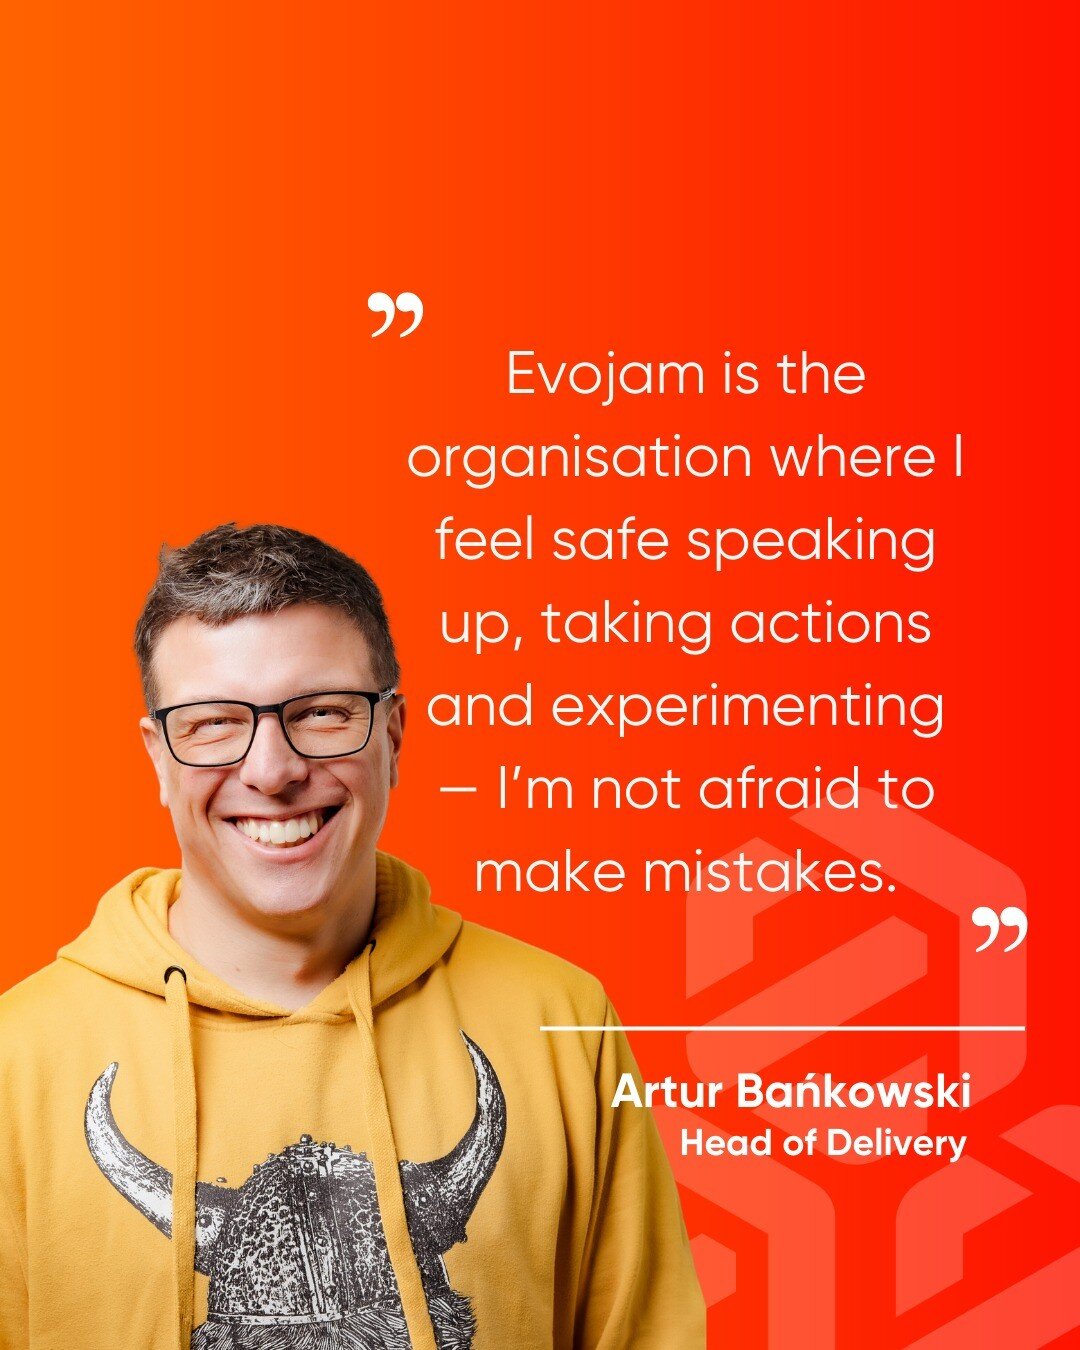 #EvoTestimonials

How can you grow in no time? 📈

By trying out new things.

To do so, you need a supportive environment that allows you to experiment and make mistakes. That's what it's like at Evojam, according to Artur Bańkowski, our Head of Deli